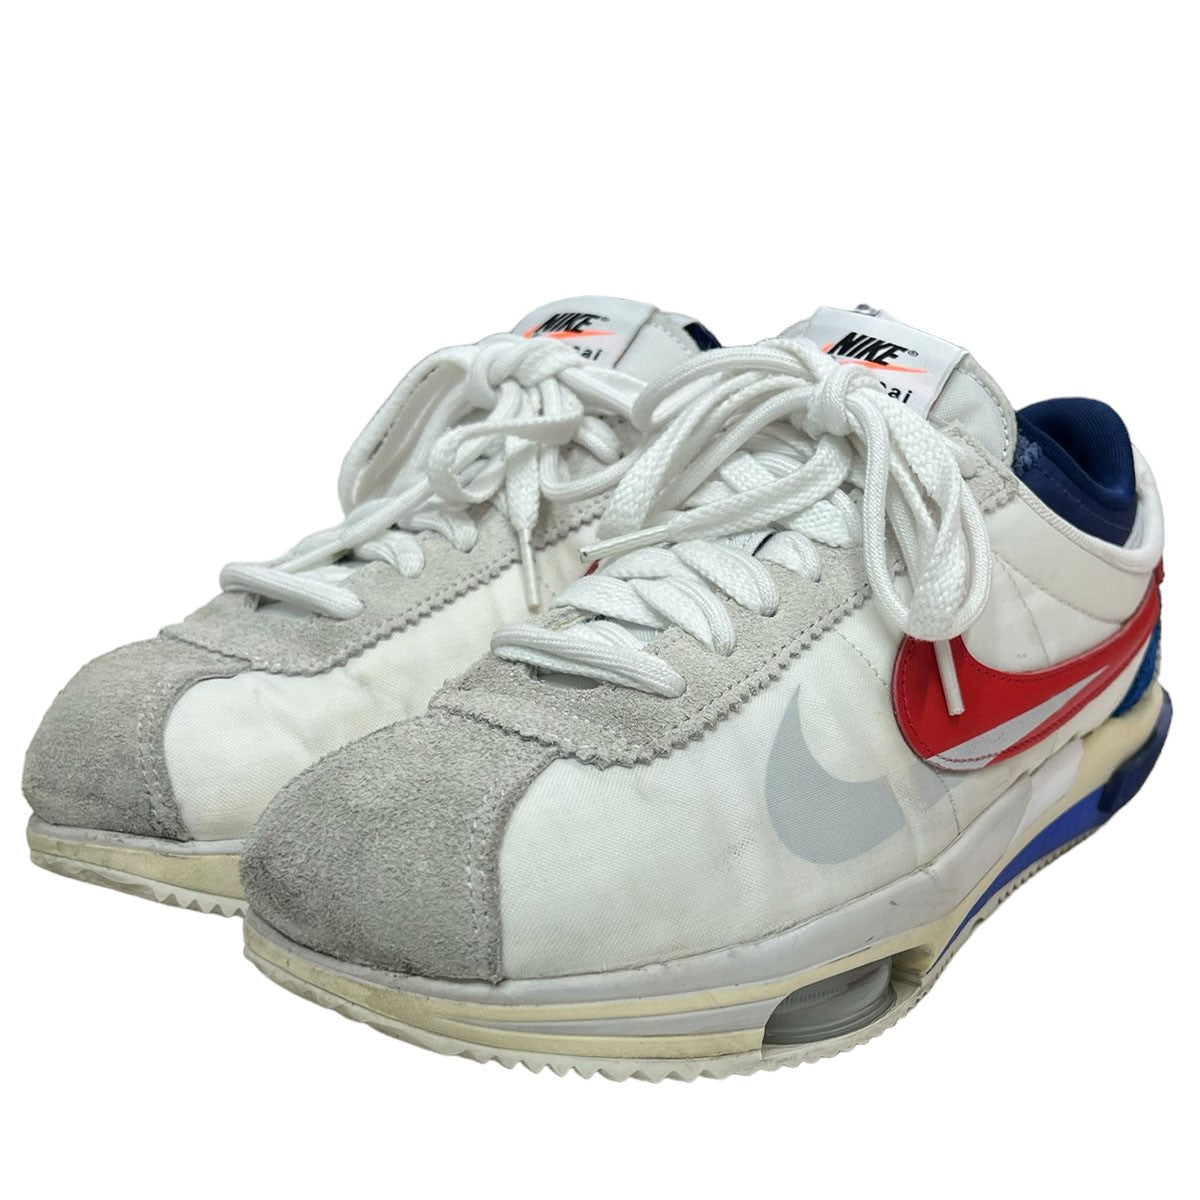 sacai×NIKE ZOOM CORTEZ SP White and University Red スニーカー ...